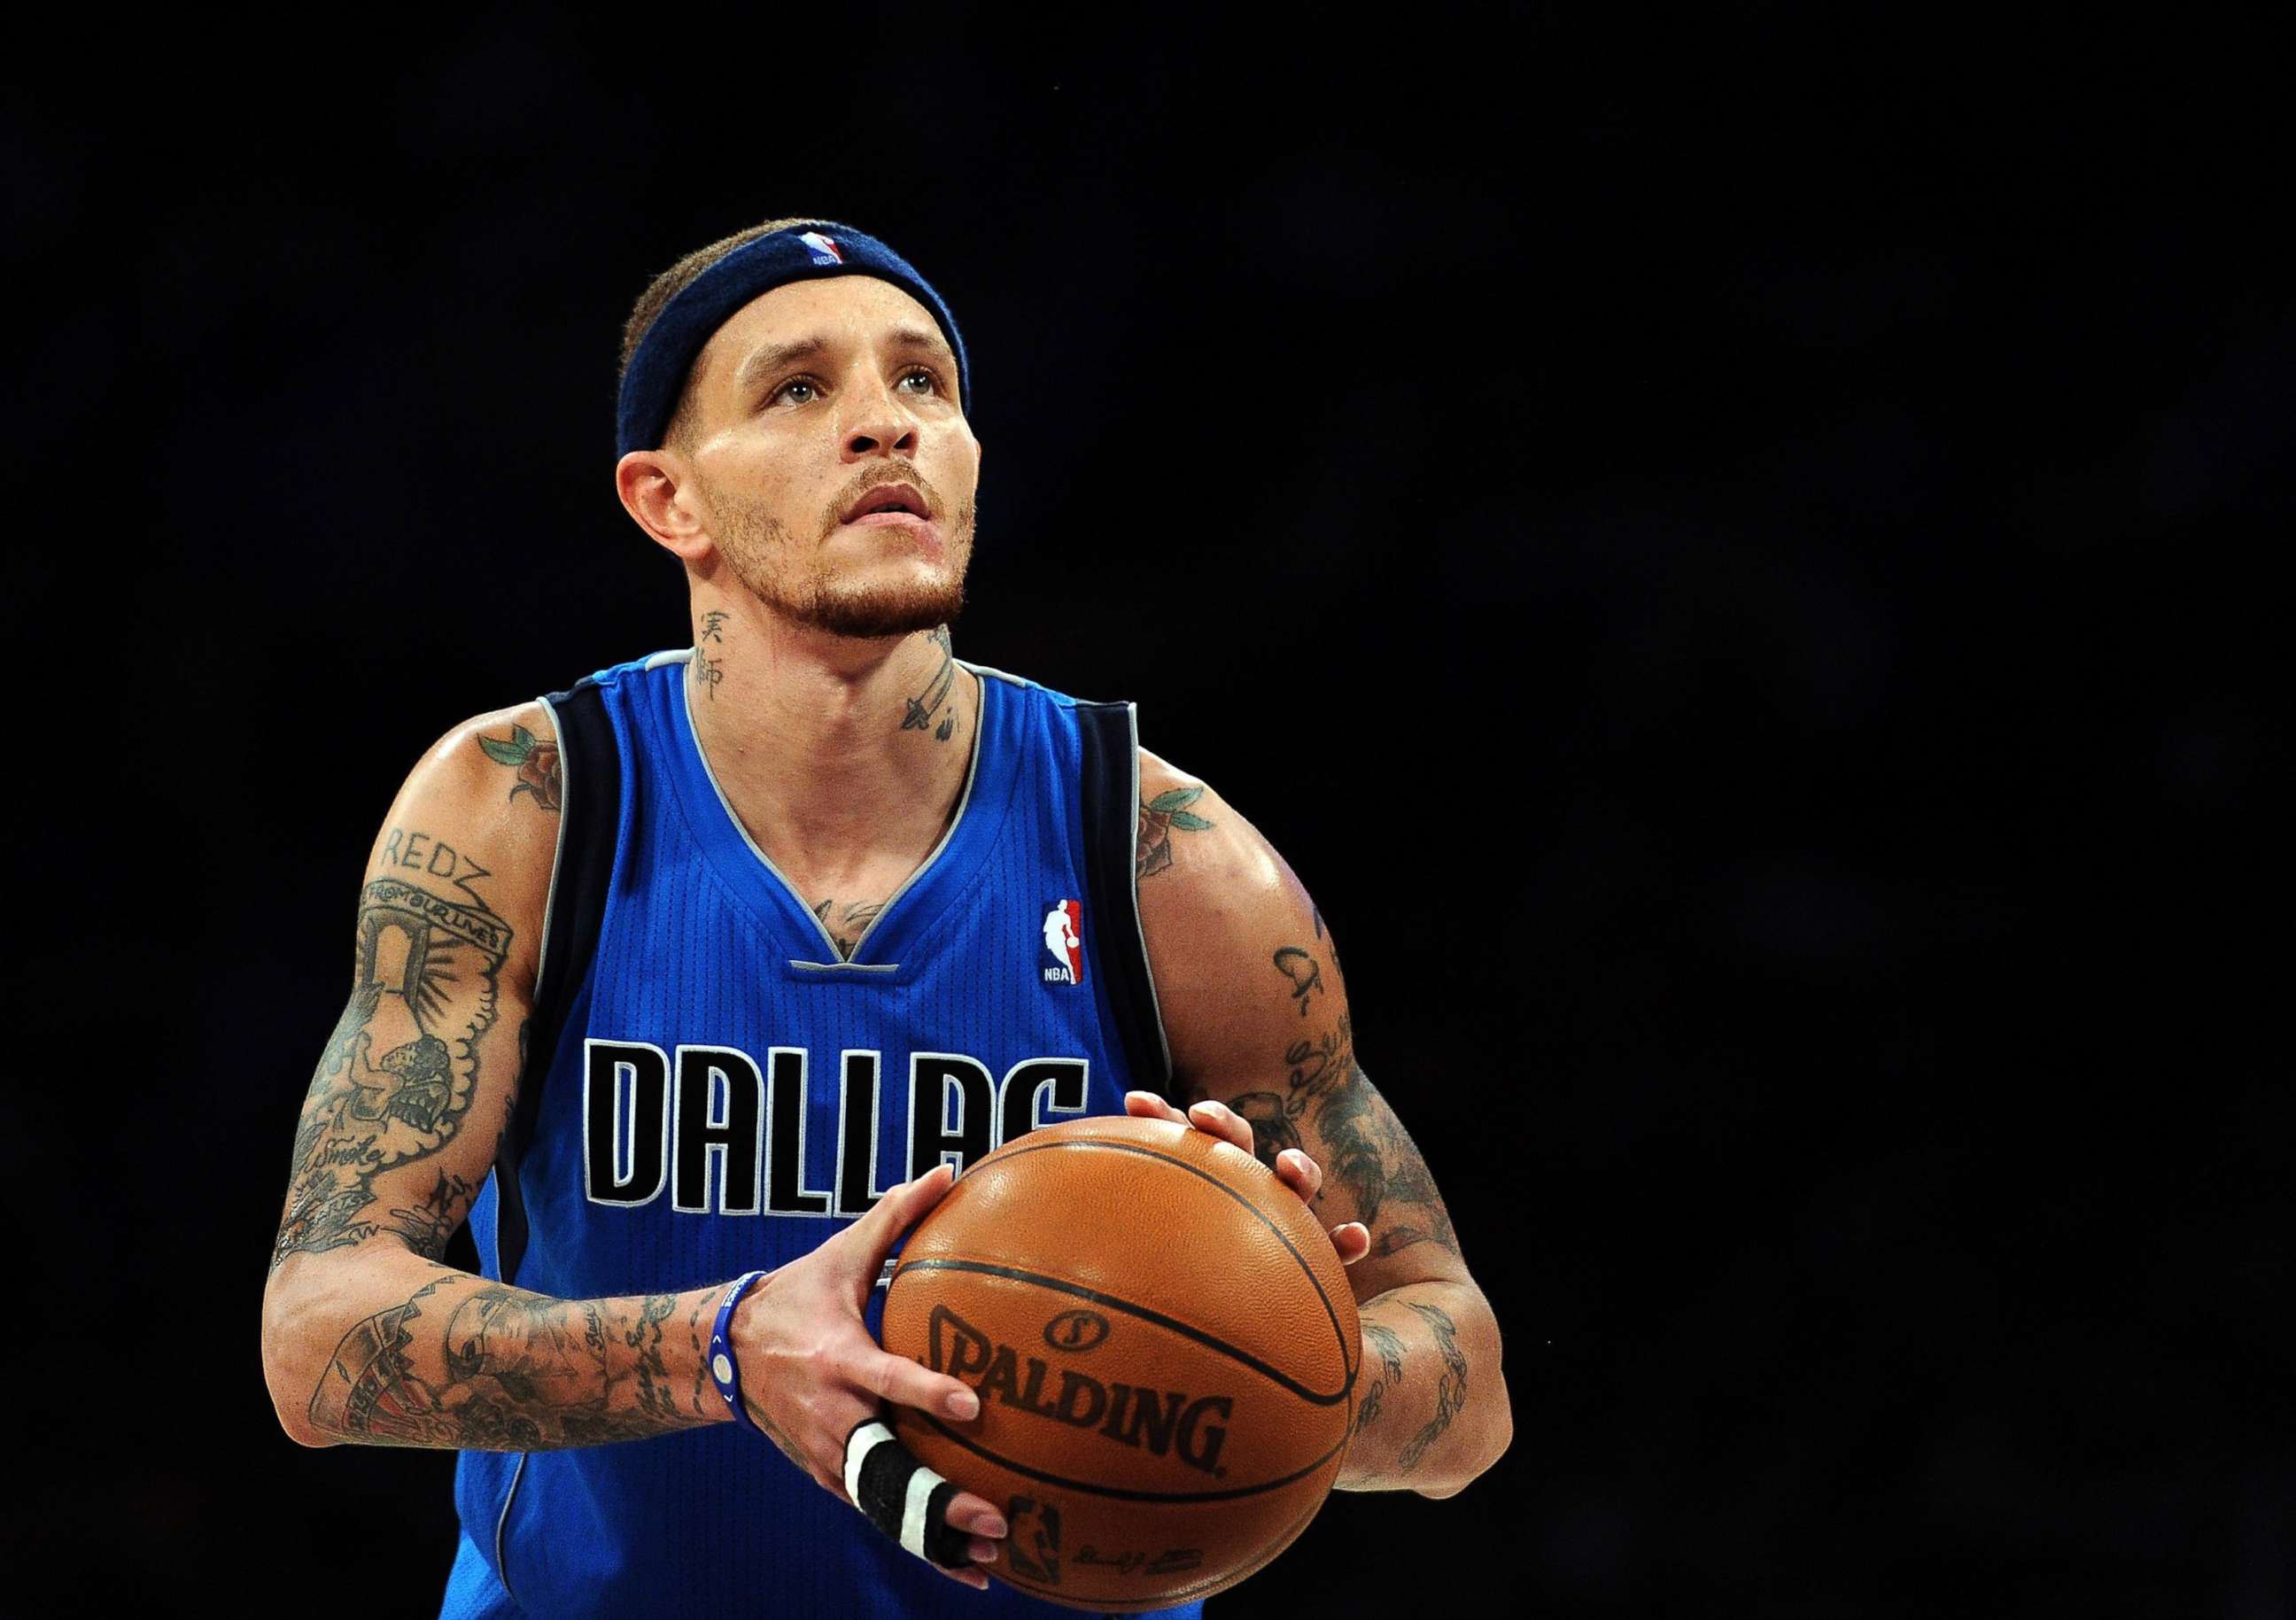 PHOTO: Delonte West of the Dallas Mavericks shoots a free throw during a game in Los Angeles, April 15, 2012.